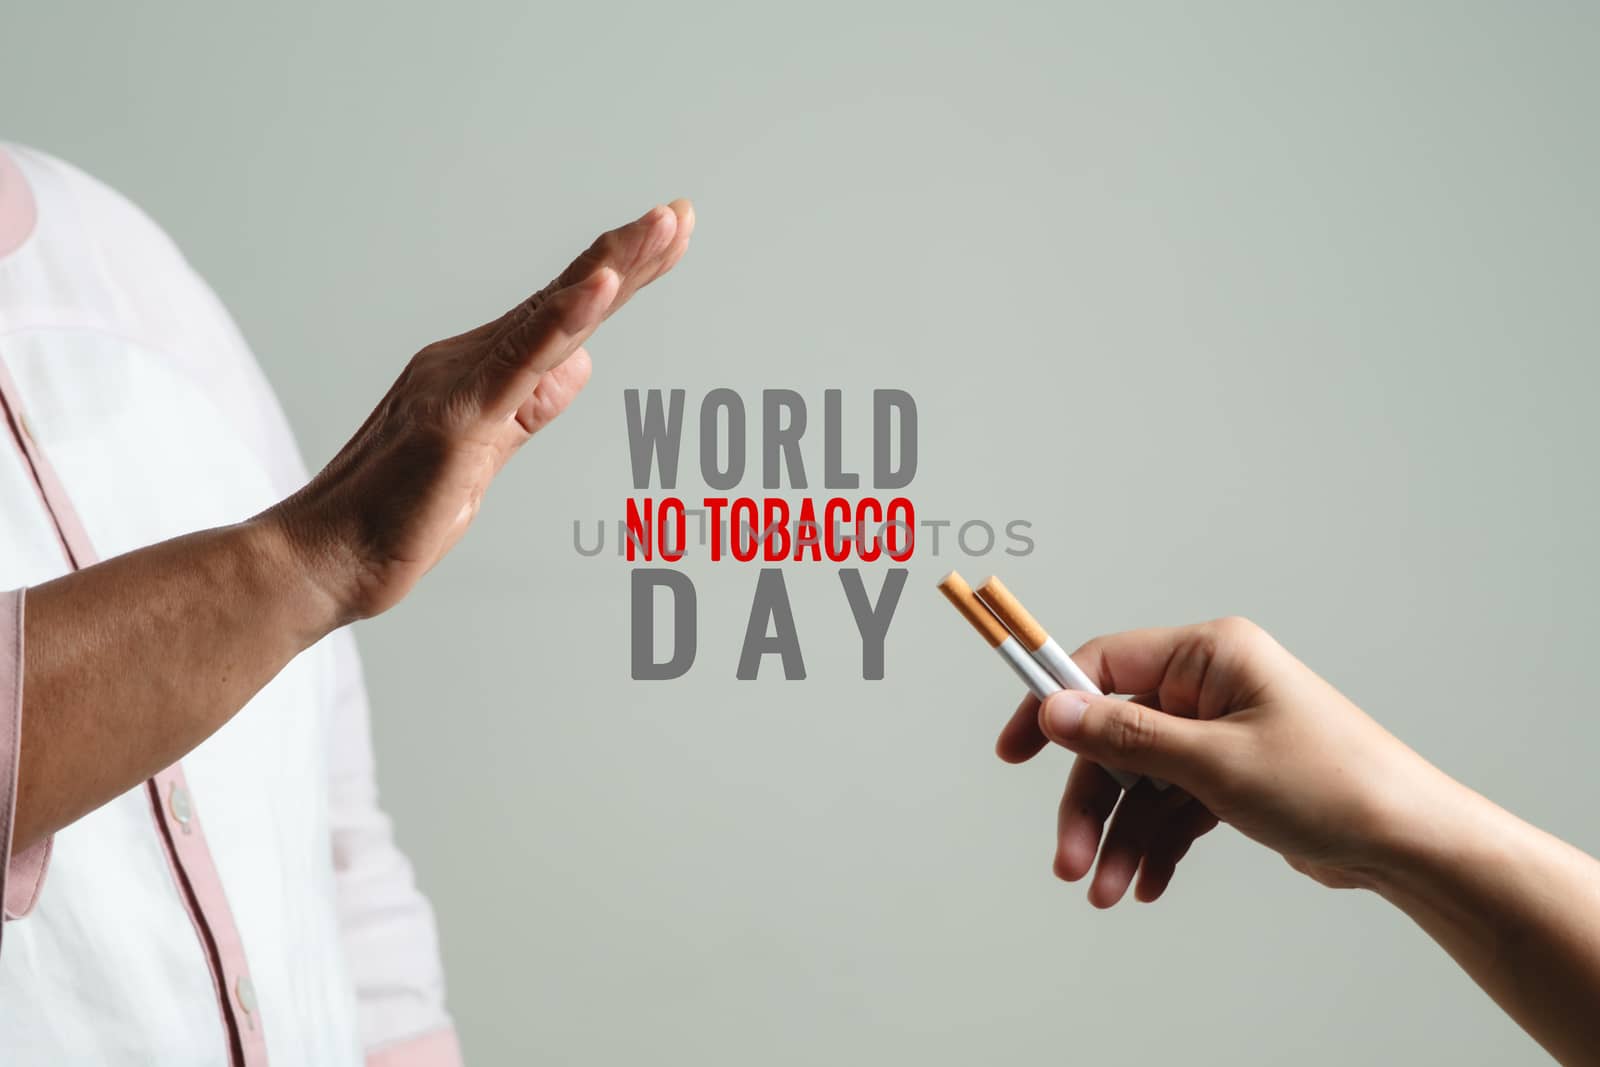 Quit smoking, no tobacco day, mother hands gesture reject propos by psodaz